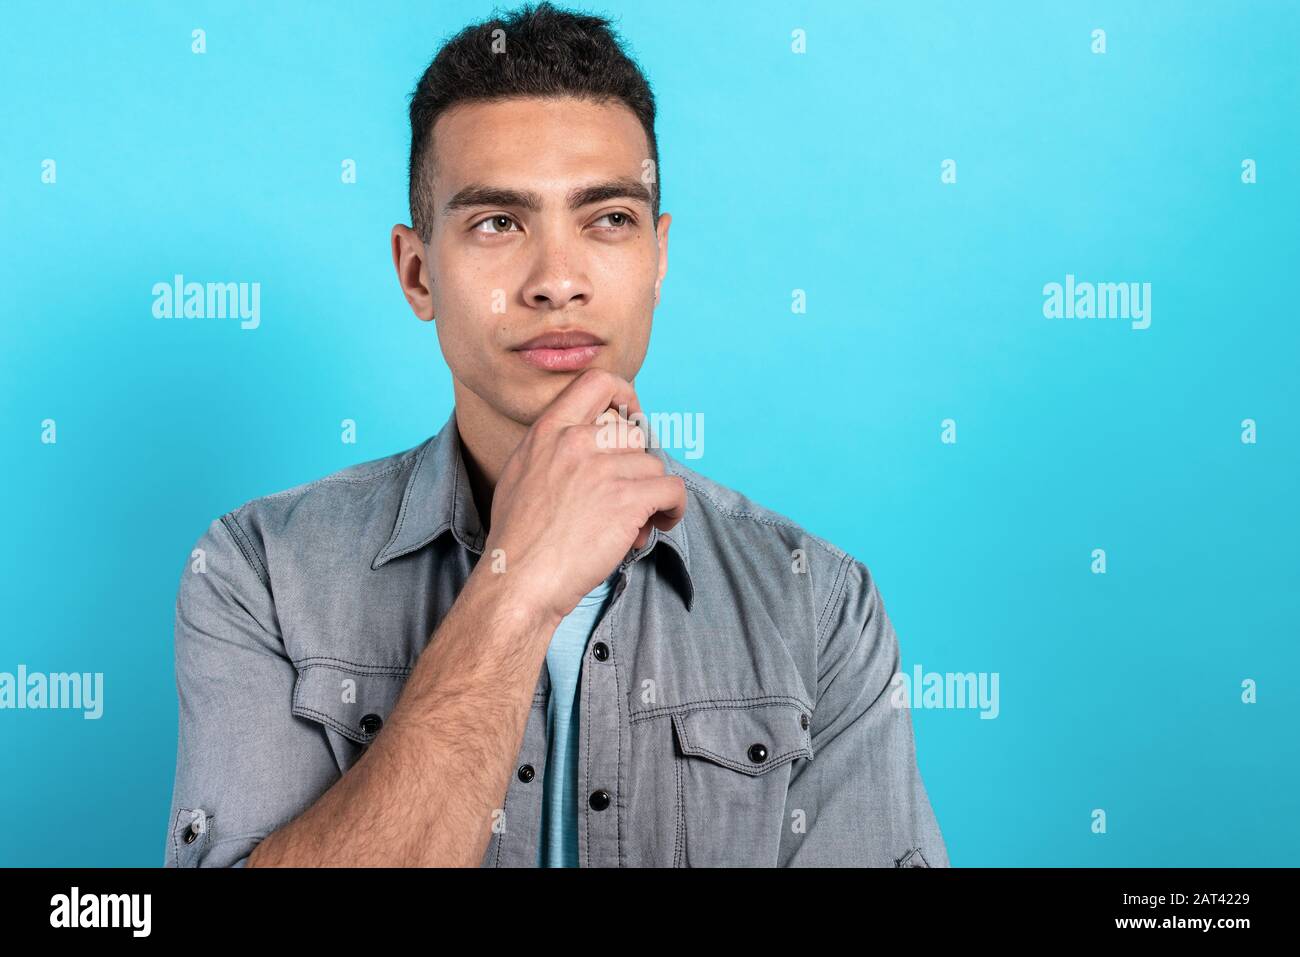 Handsome mulatto man looking dremly and touching his chin. Glance sideaway Stock Photo